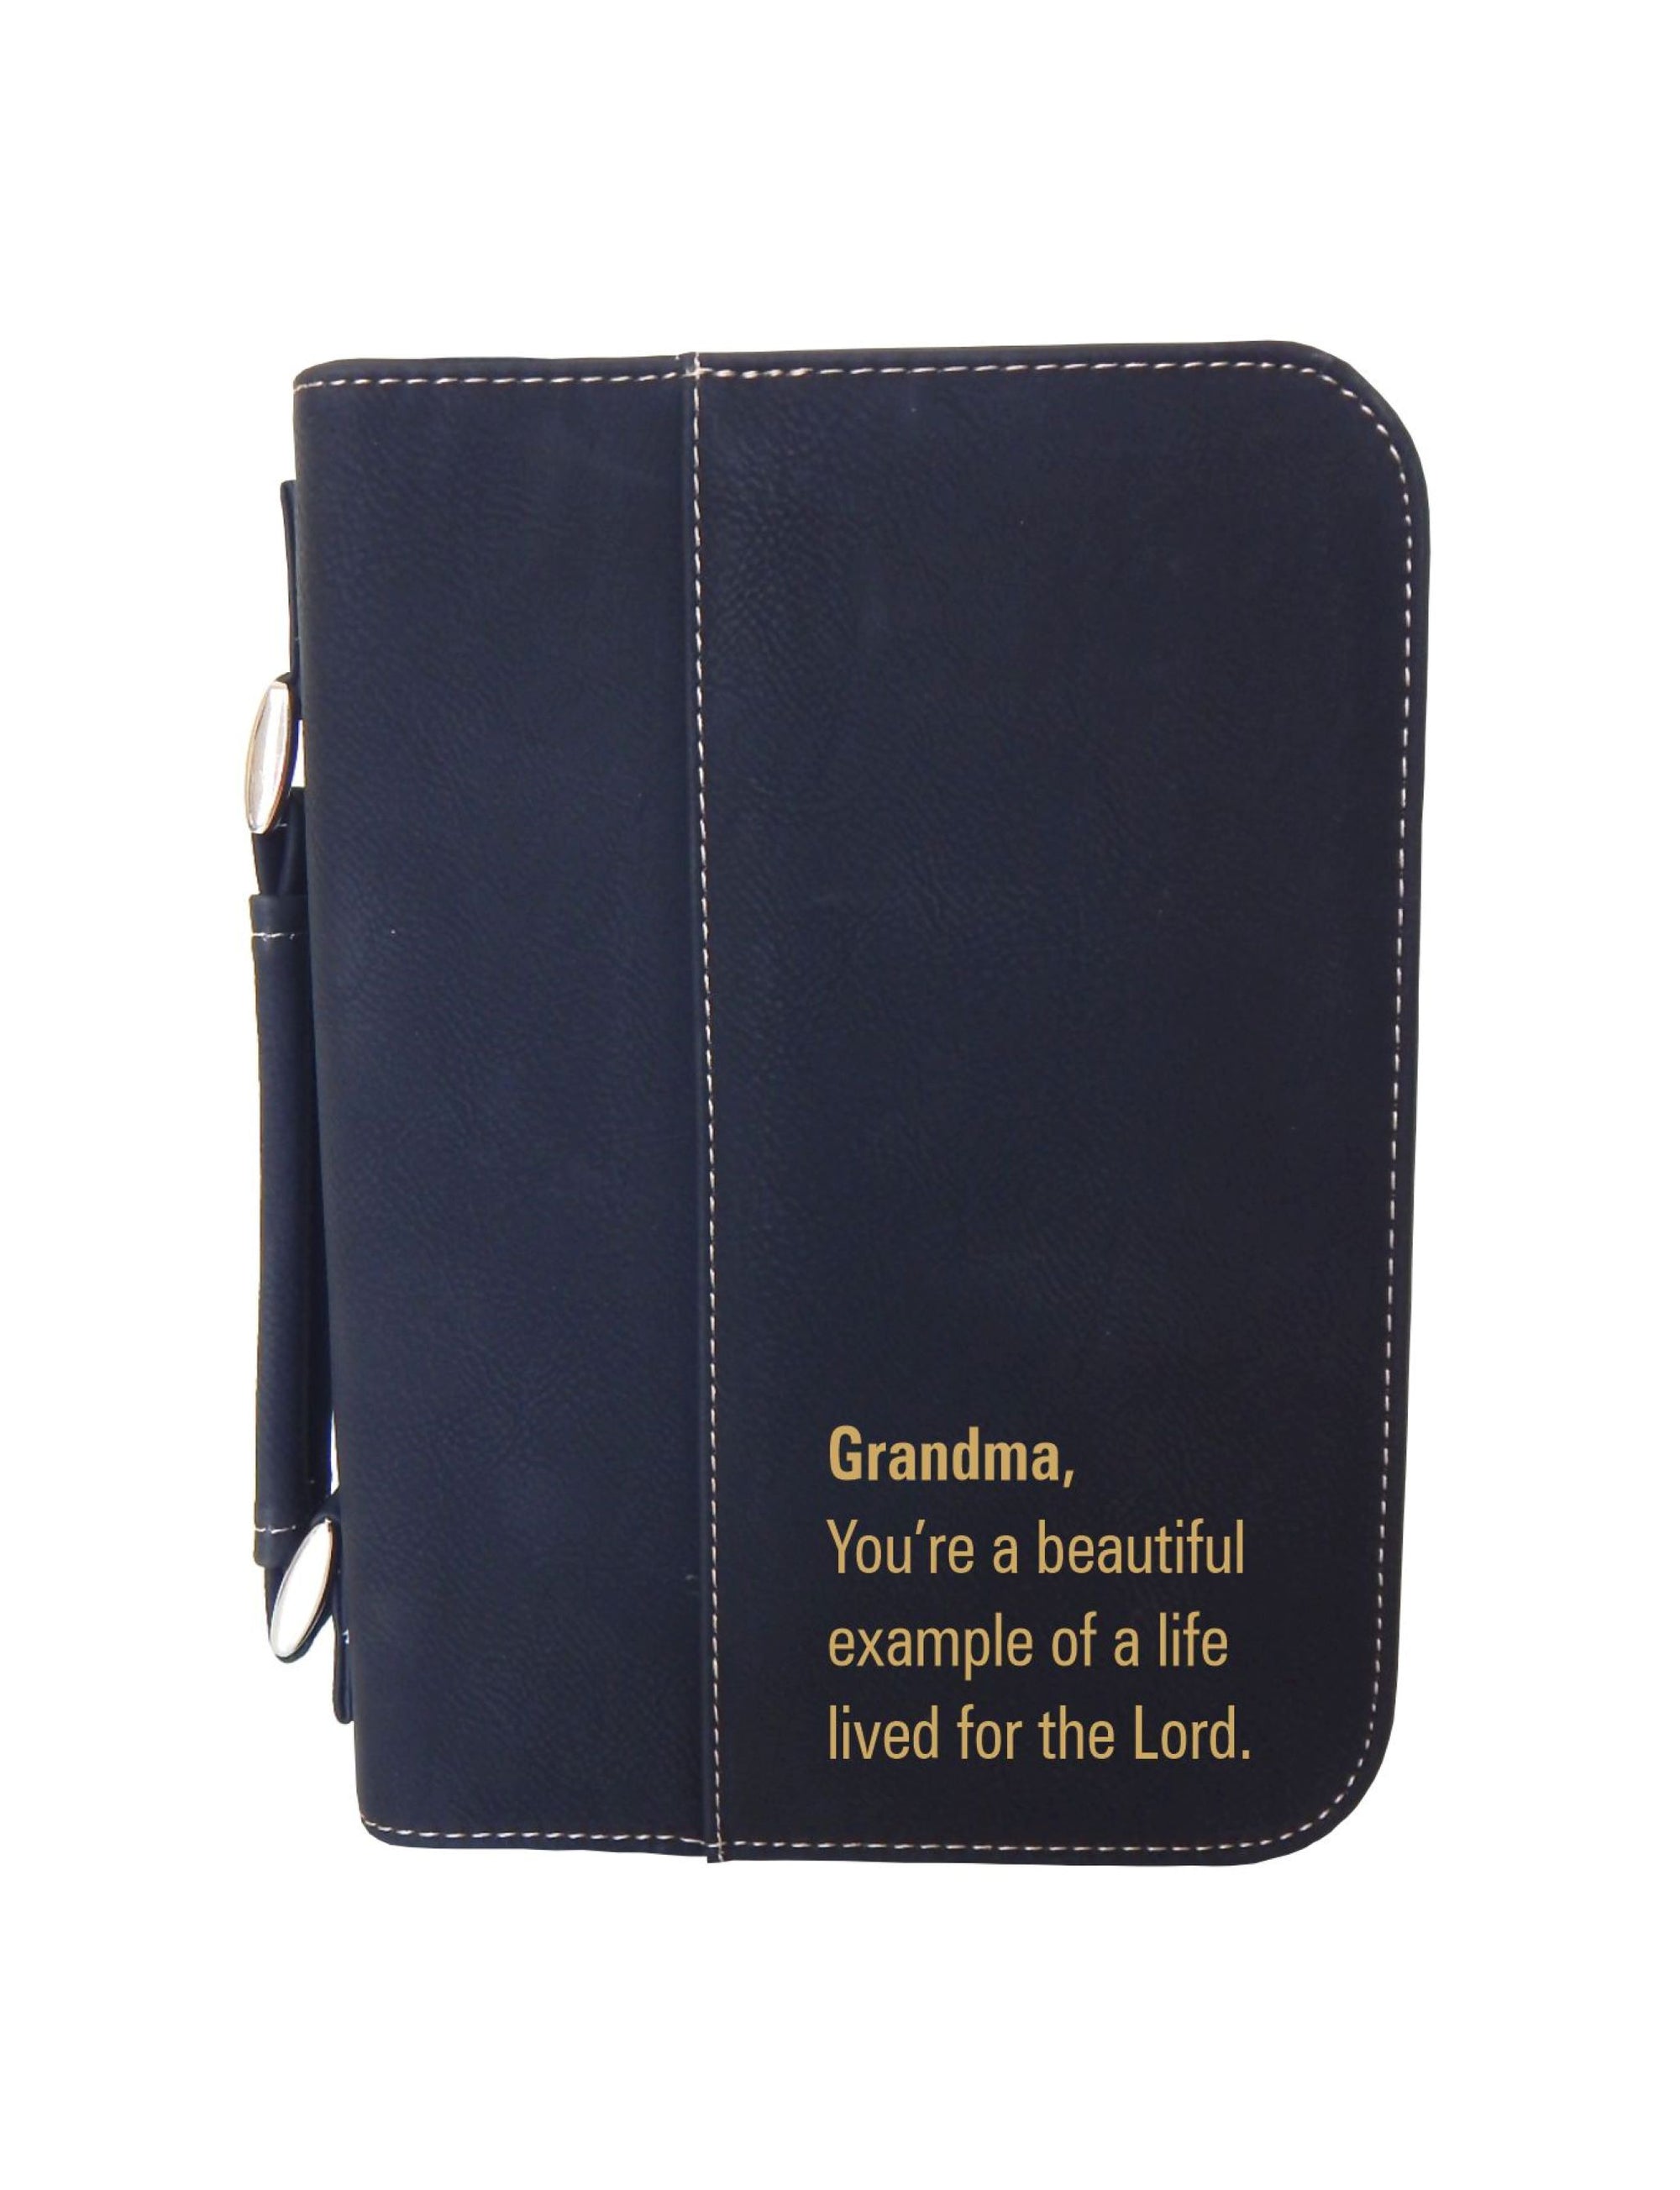 Grandmother Gift | Religious Gifts for Grandma | Engraved Bible Cover BCL033